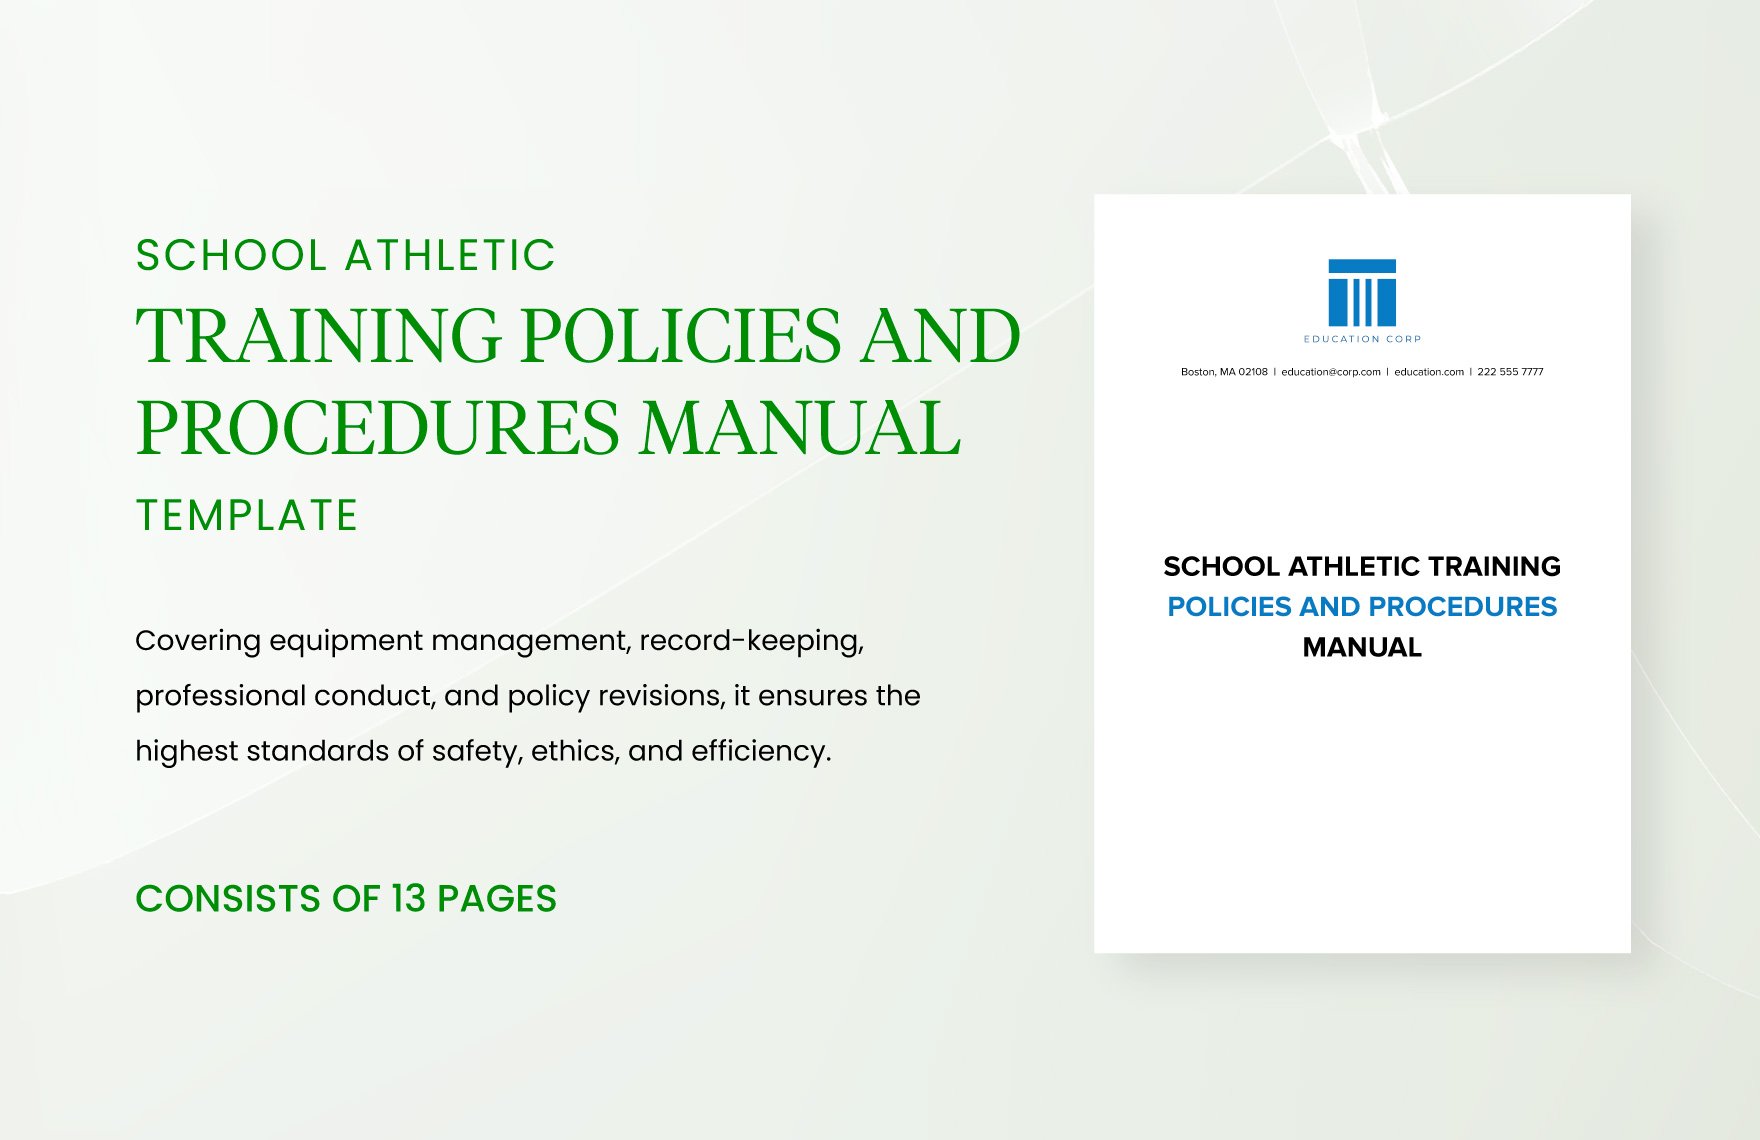 School Athletic Training Policies and Procedures Manual Template